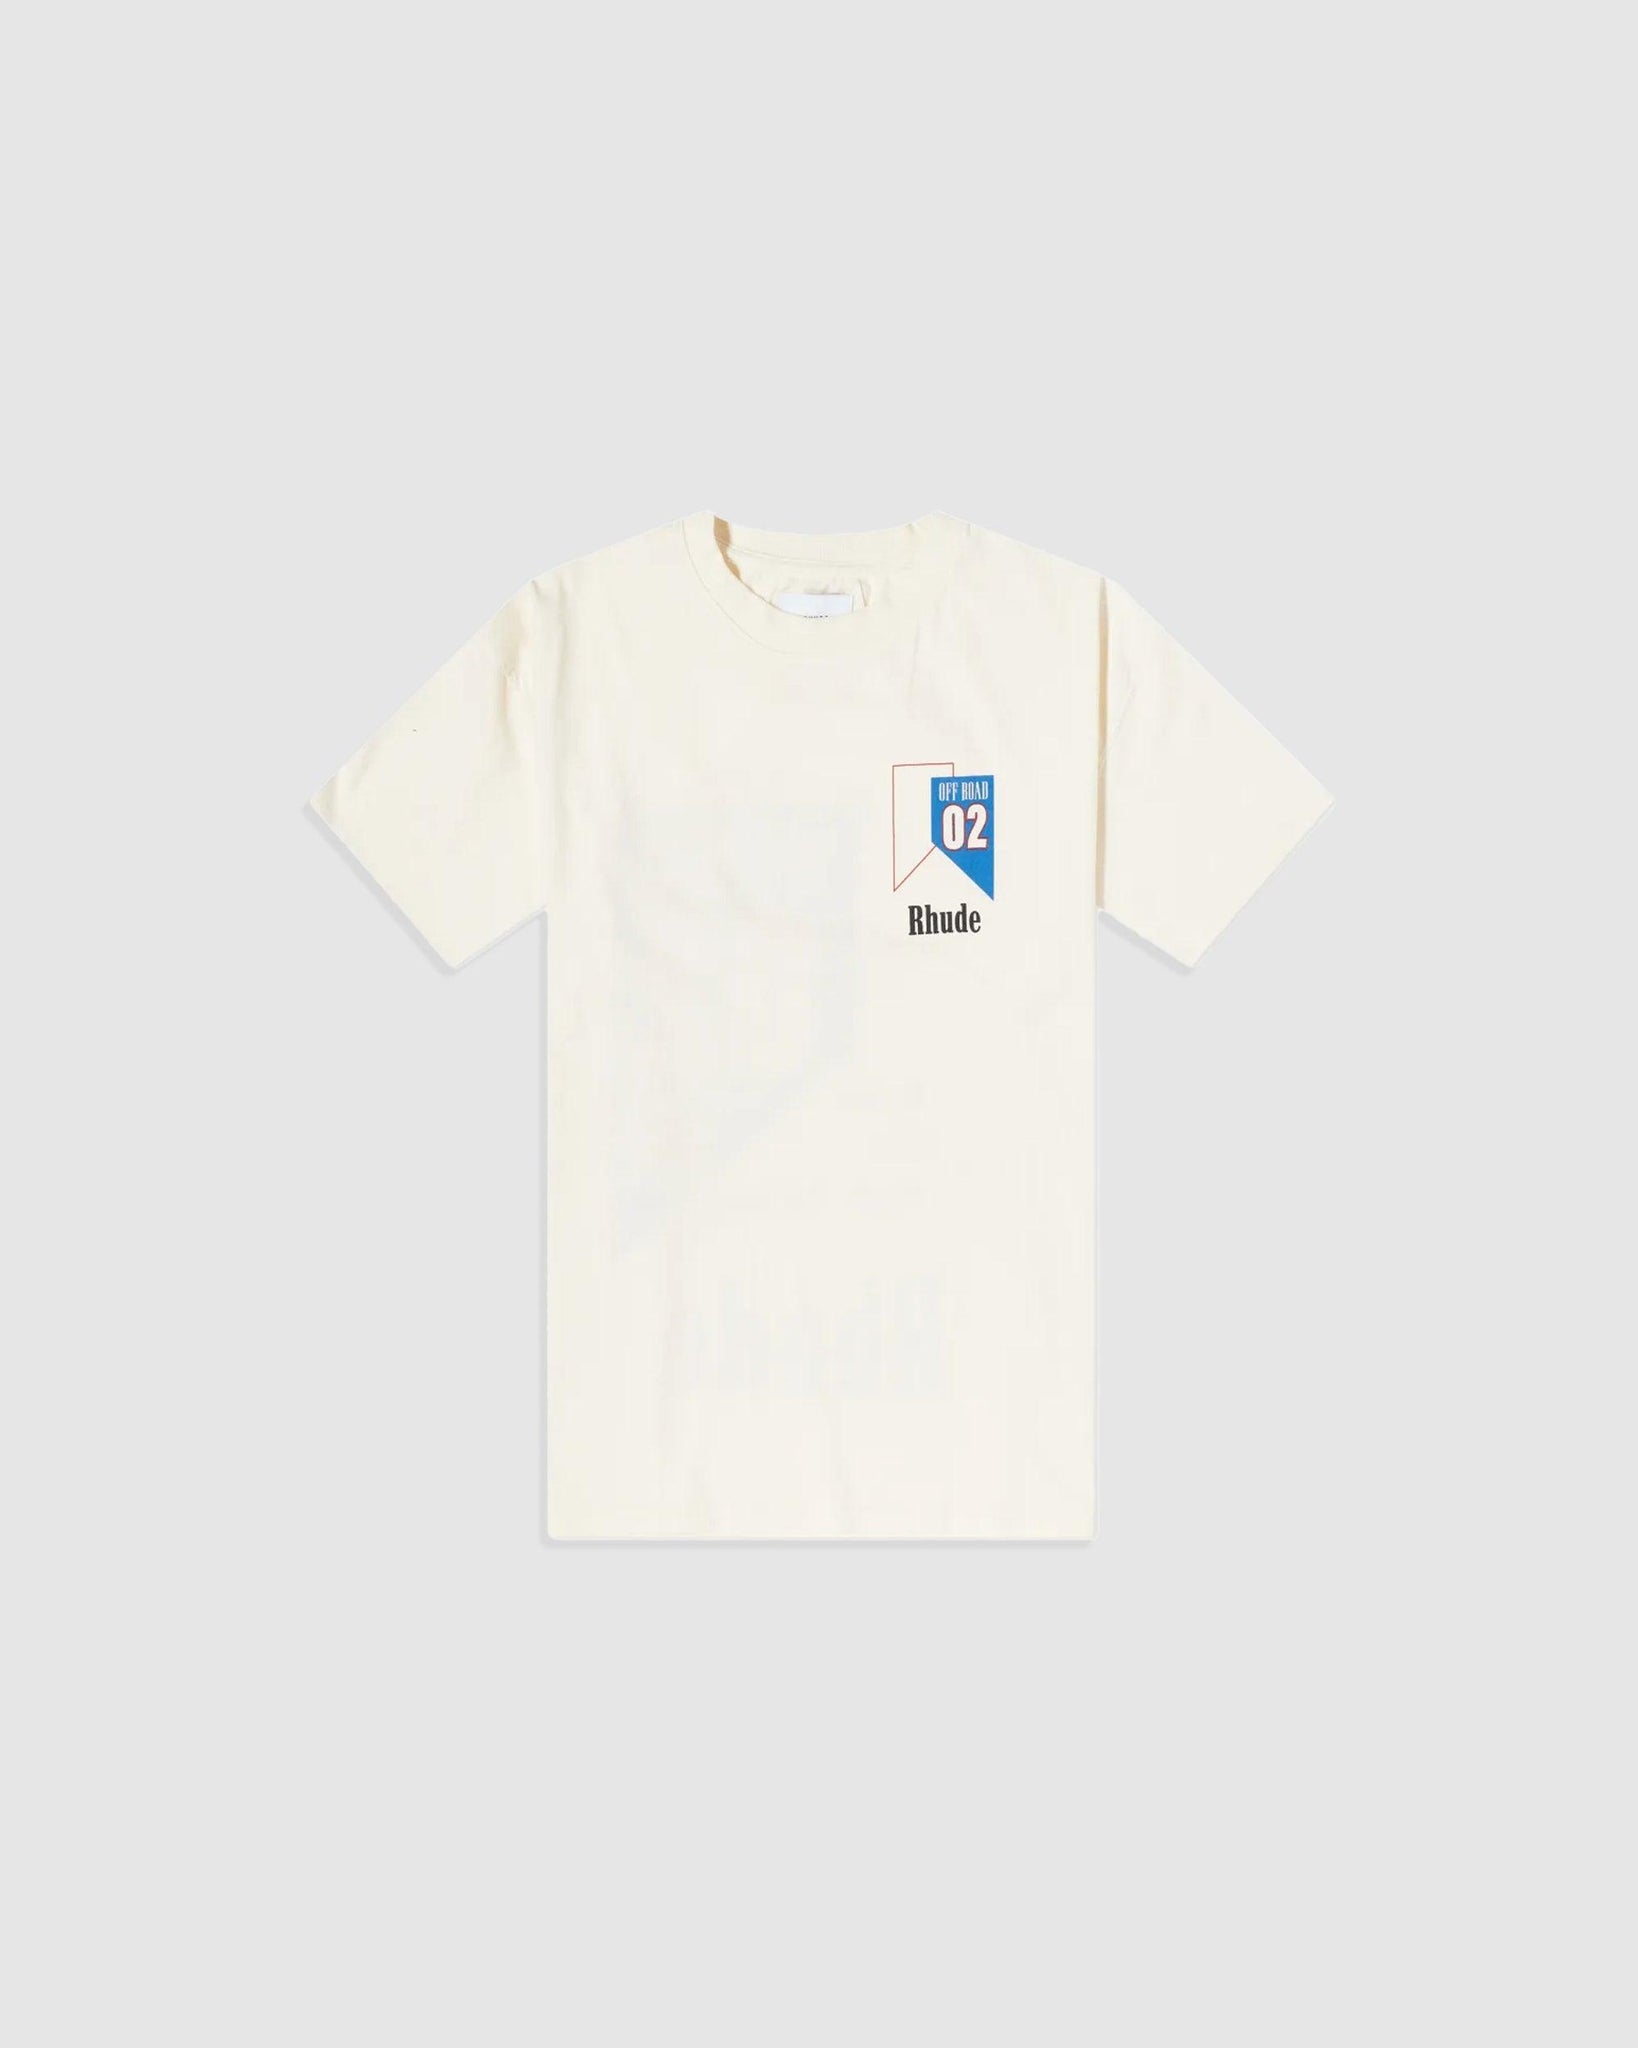 Rhude 02 Tee Vintage White - {{ collection.title }} - Chinatown Country Club 